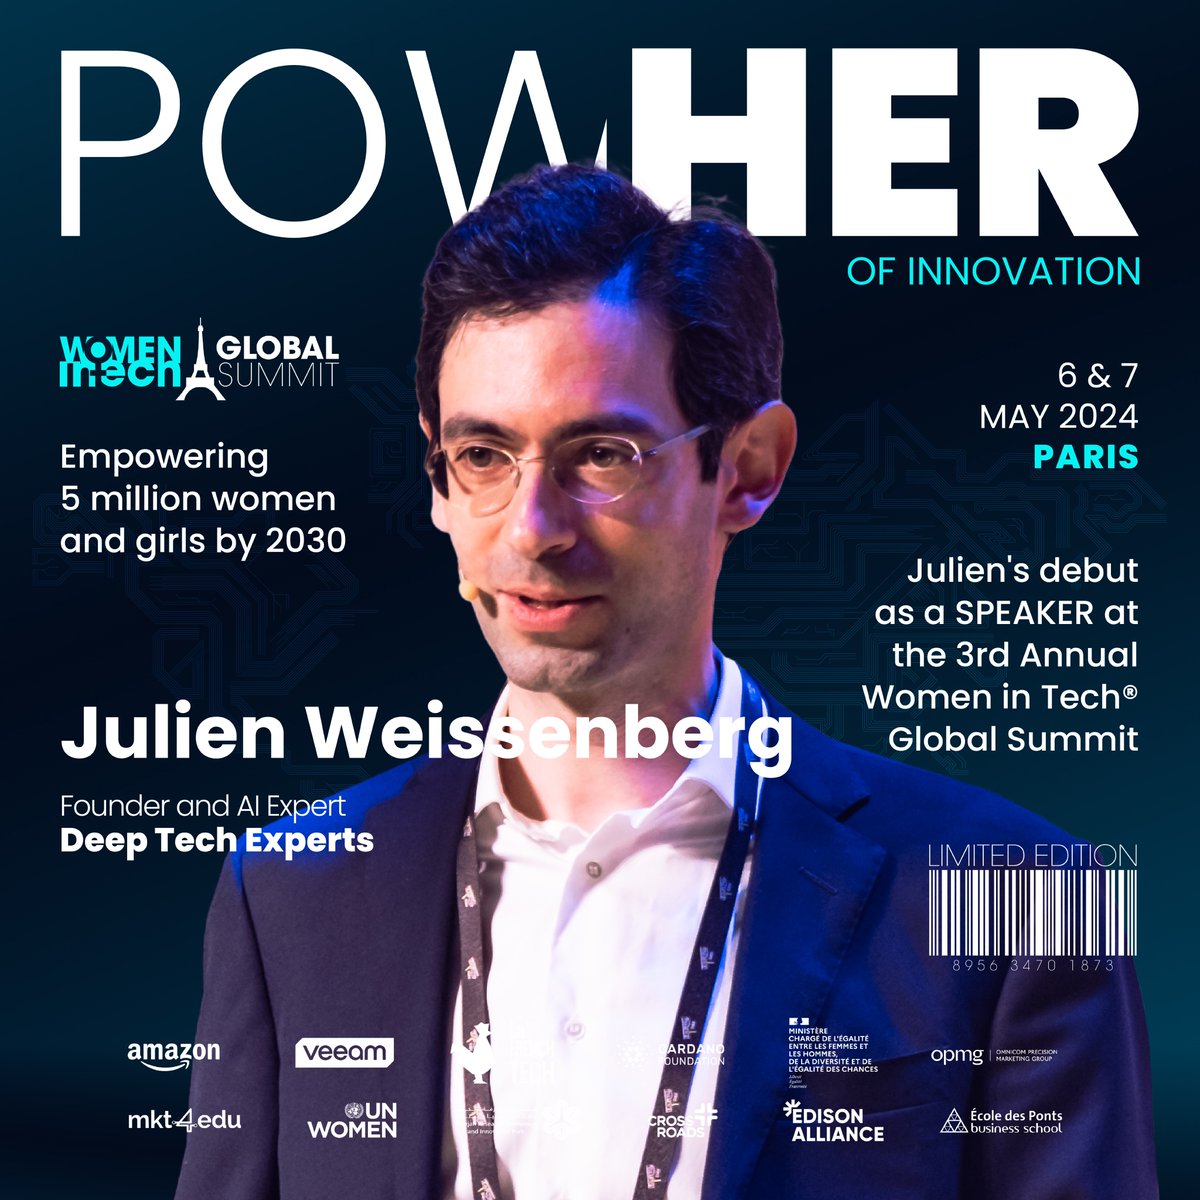 🎉Join us at the Women in Tech® Global Summit, where we’ll be unpacking and admiring the PowHER of Innovation as this year’s theme!💃🔥🔥 Meet our speaker Julien Weissenberg, Founder and AI Expert at Deep Tech Experts. Link: lnkd.in/dJrvNNJu #WITGS24 #PowHER